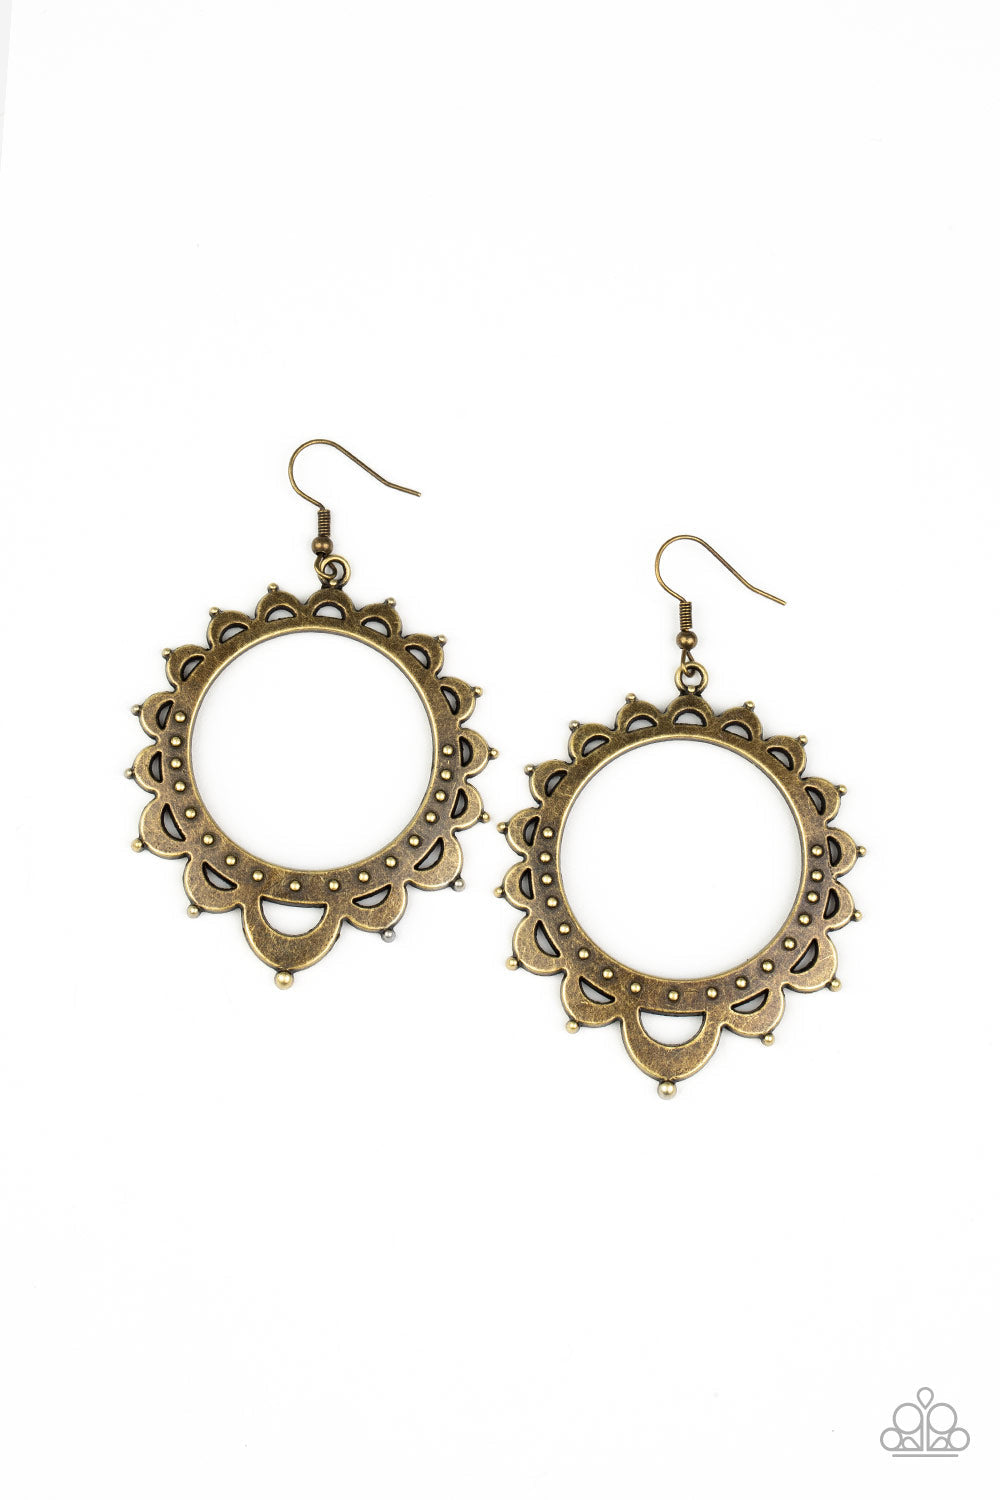 Casually Capricious - Brass Fashion Earrings - Paparazzi Accessories - Studded petal-like frames radiate out from an antiqued brass hoop, coalescing into a whimsical sunburst fashion earrings. Trendy fashion jewelry for everyone.